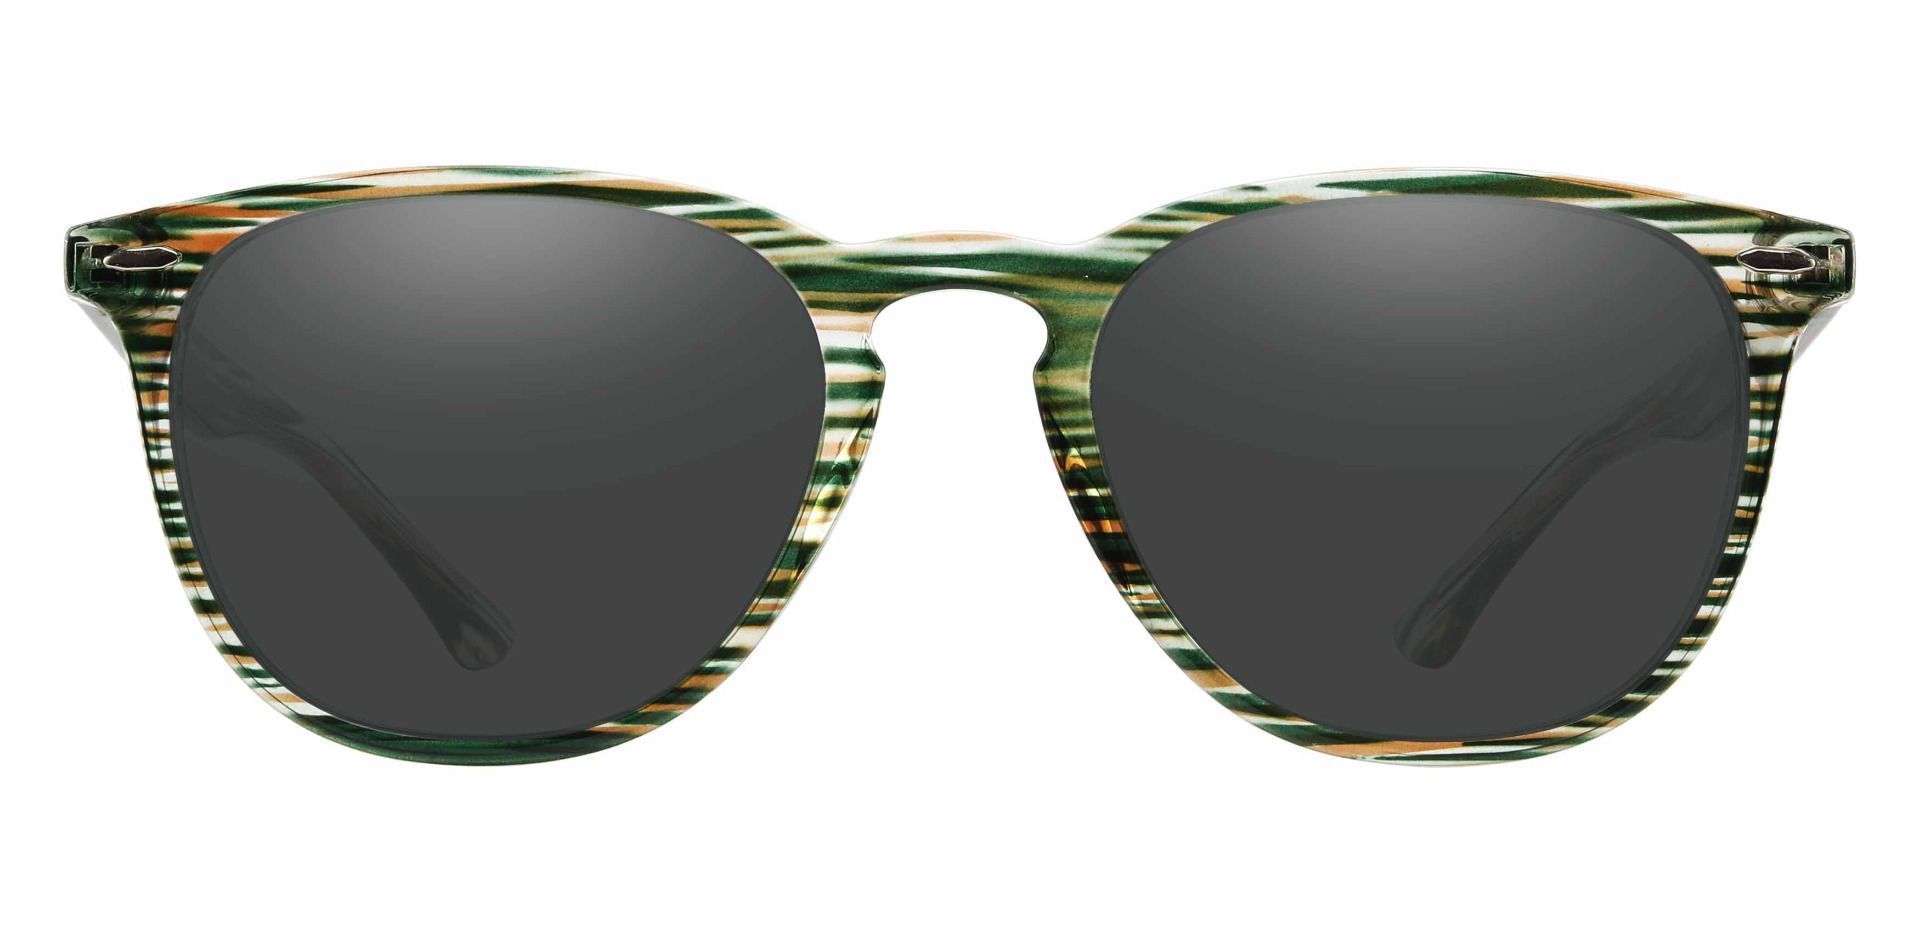 Sycamore Oval Lined Bifocal Sunglasses - Green Frame With Gray Lenses